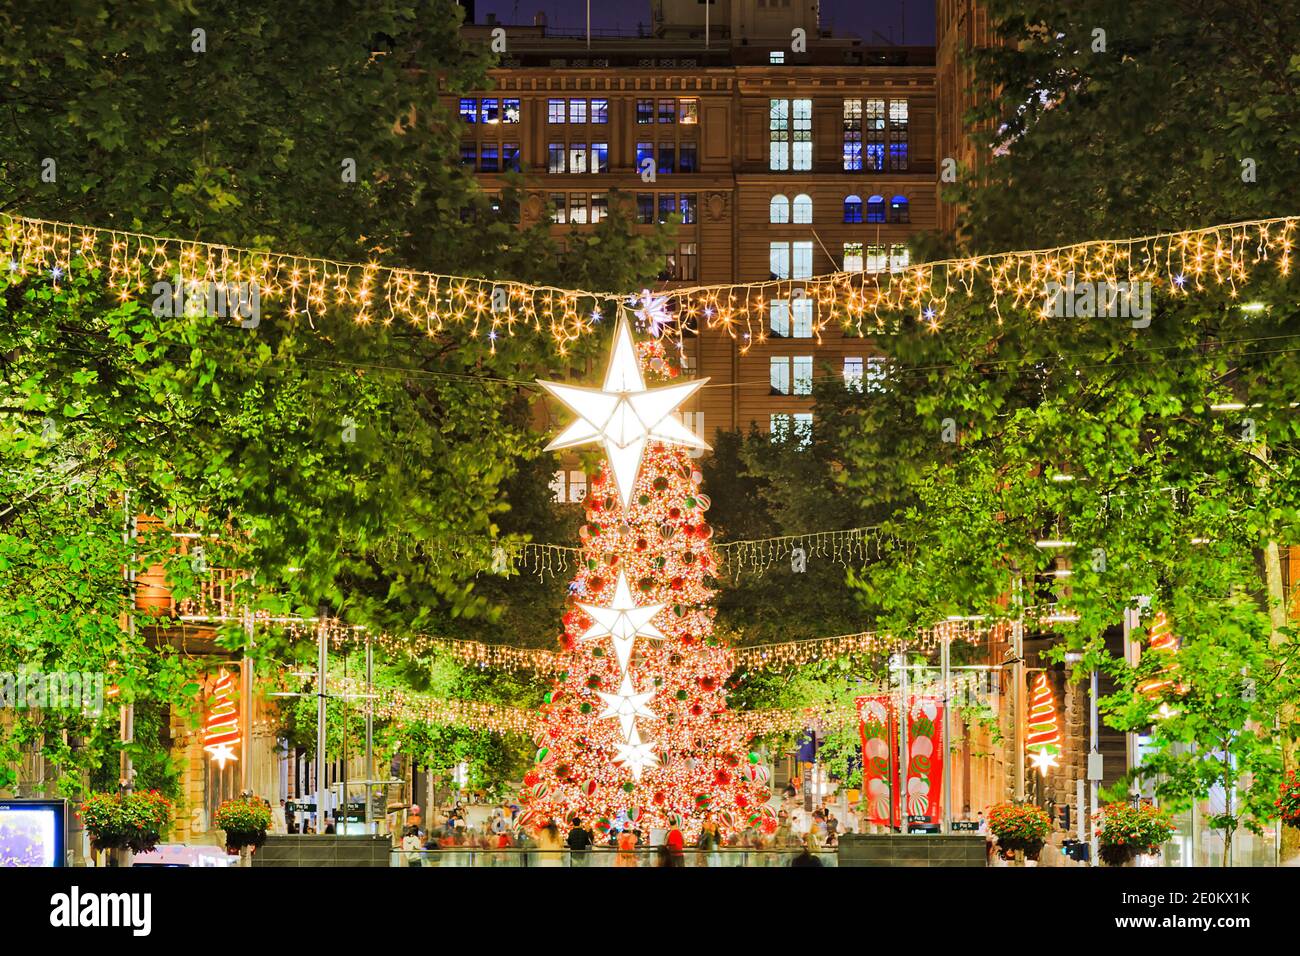 Martin place square in City of Sydney – Xmas tree at sunset. Stock Photo